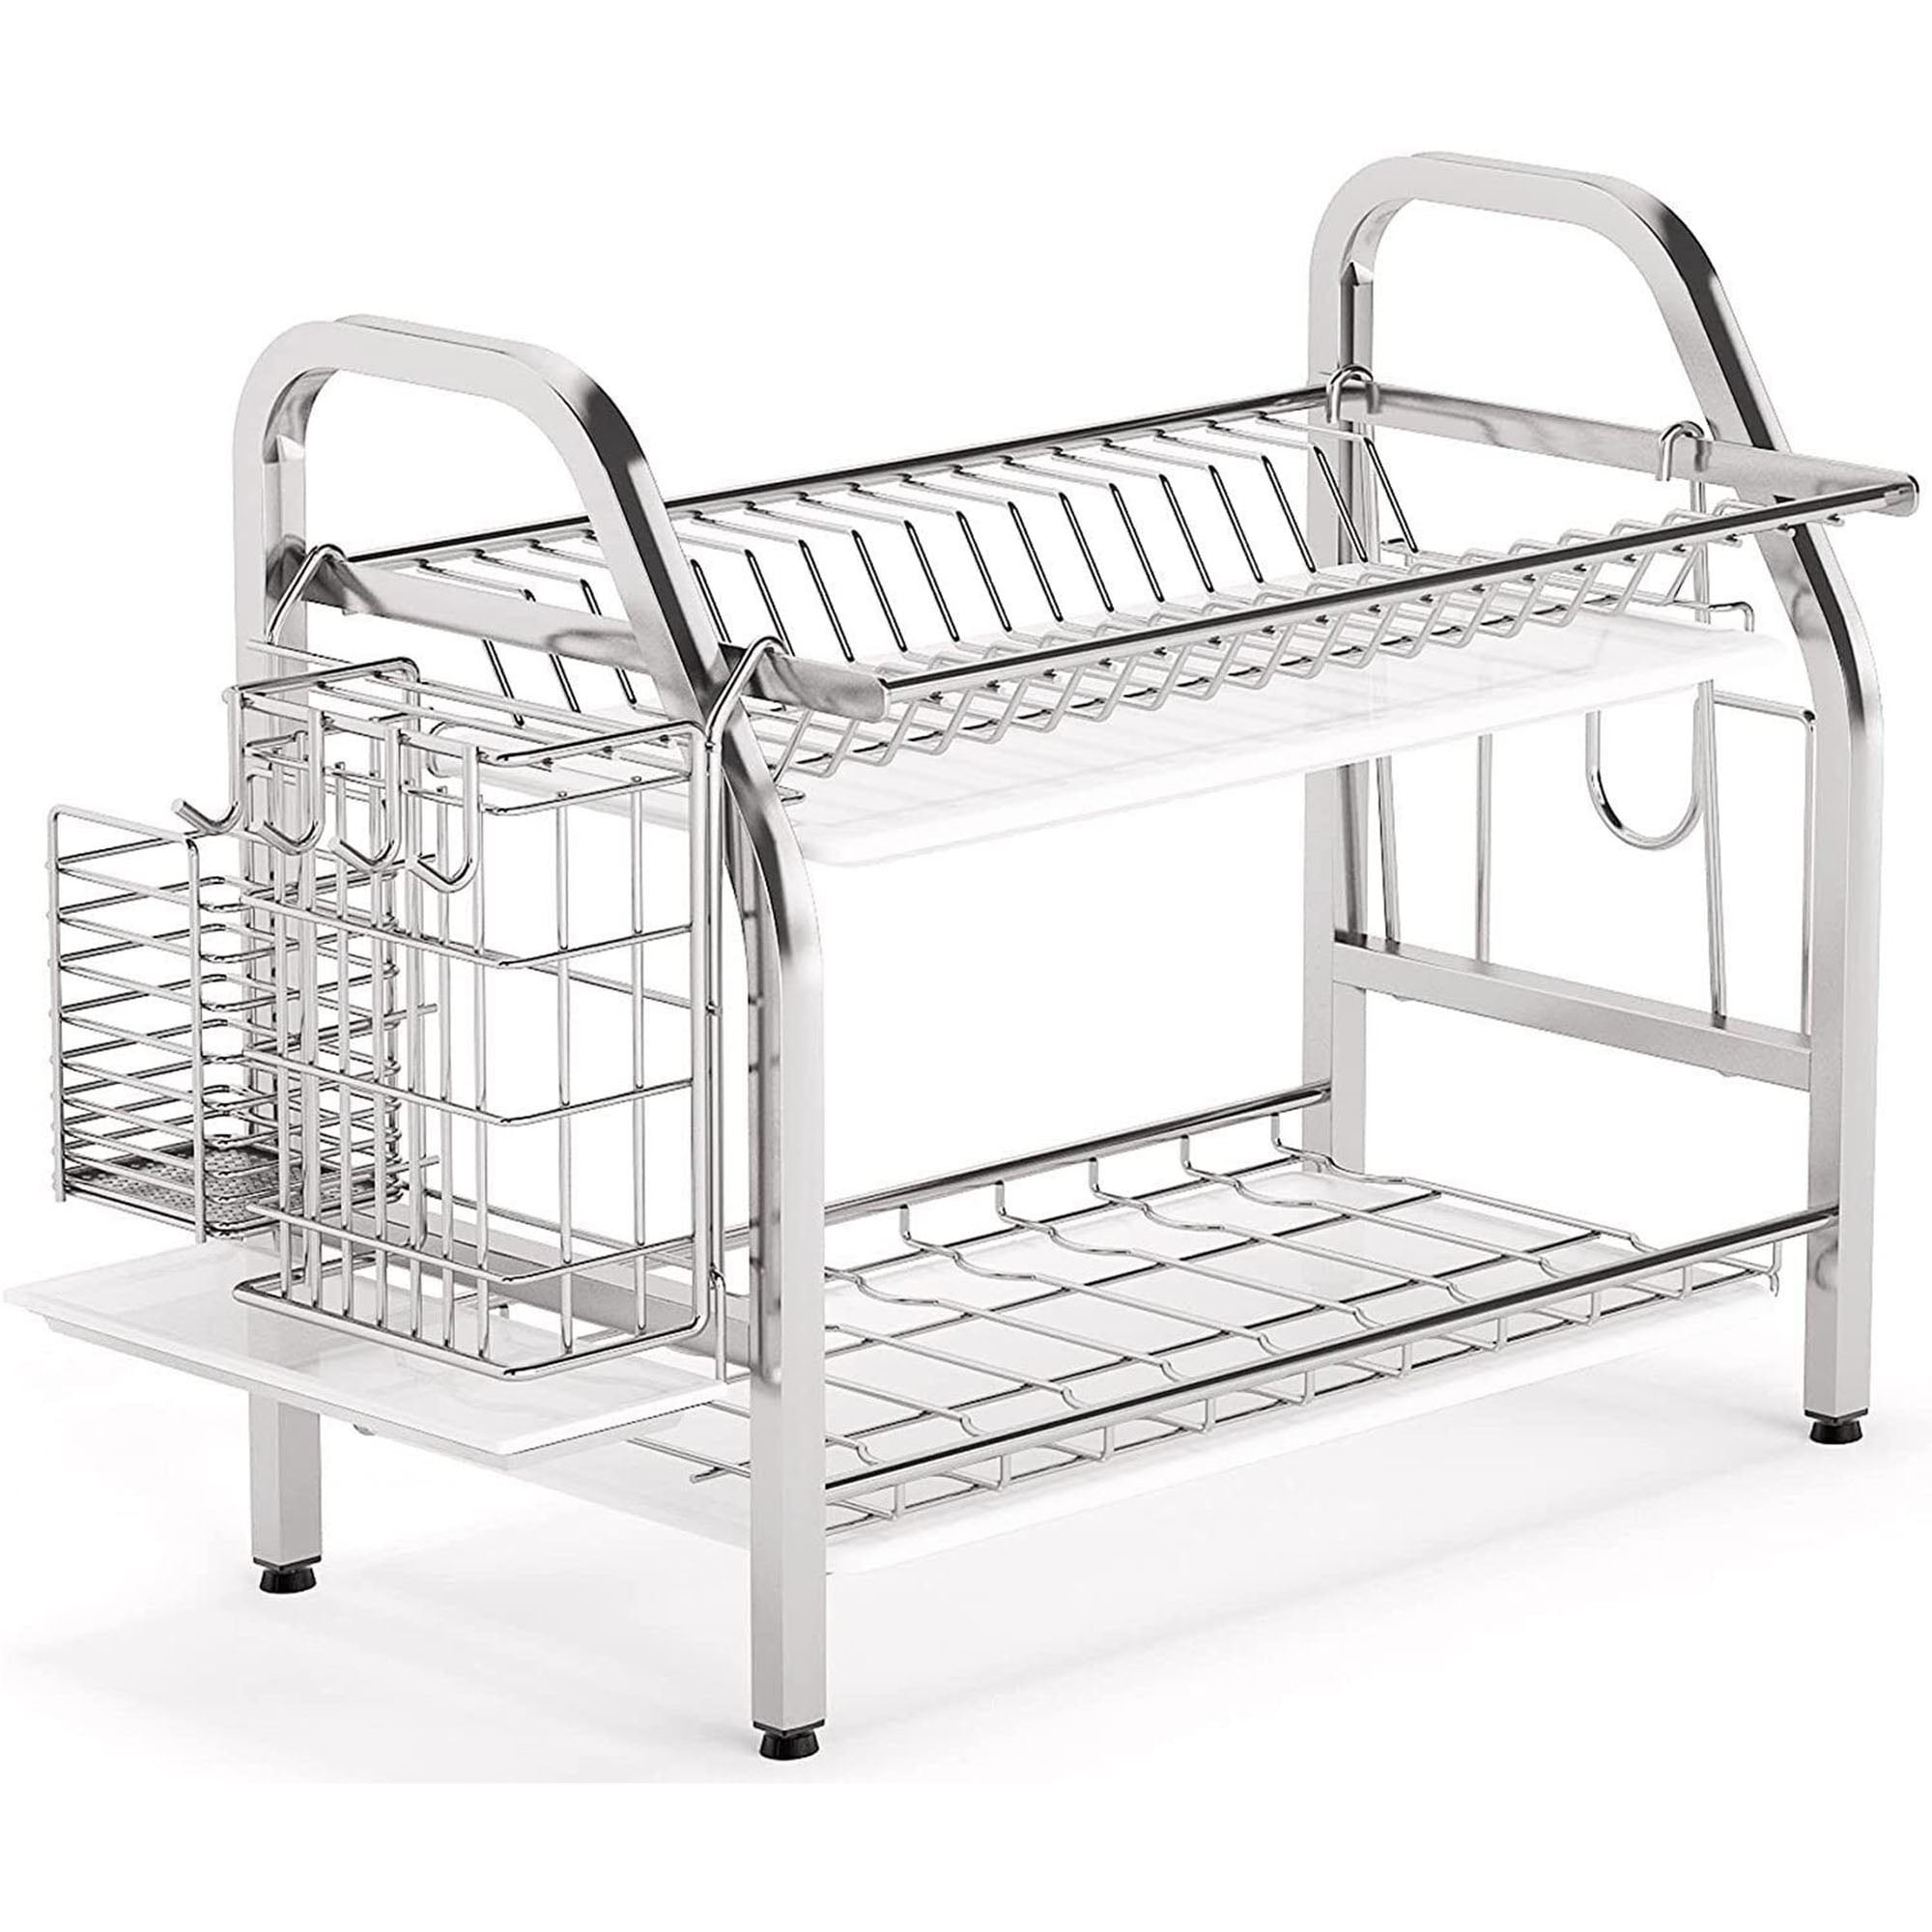 Dish Rack Kitchen Cabinet - Stainless Steel - 31-1/2 inch - Furnica